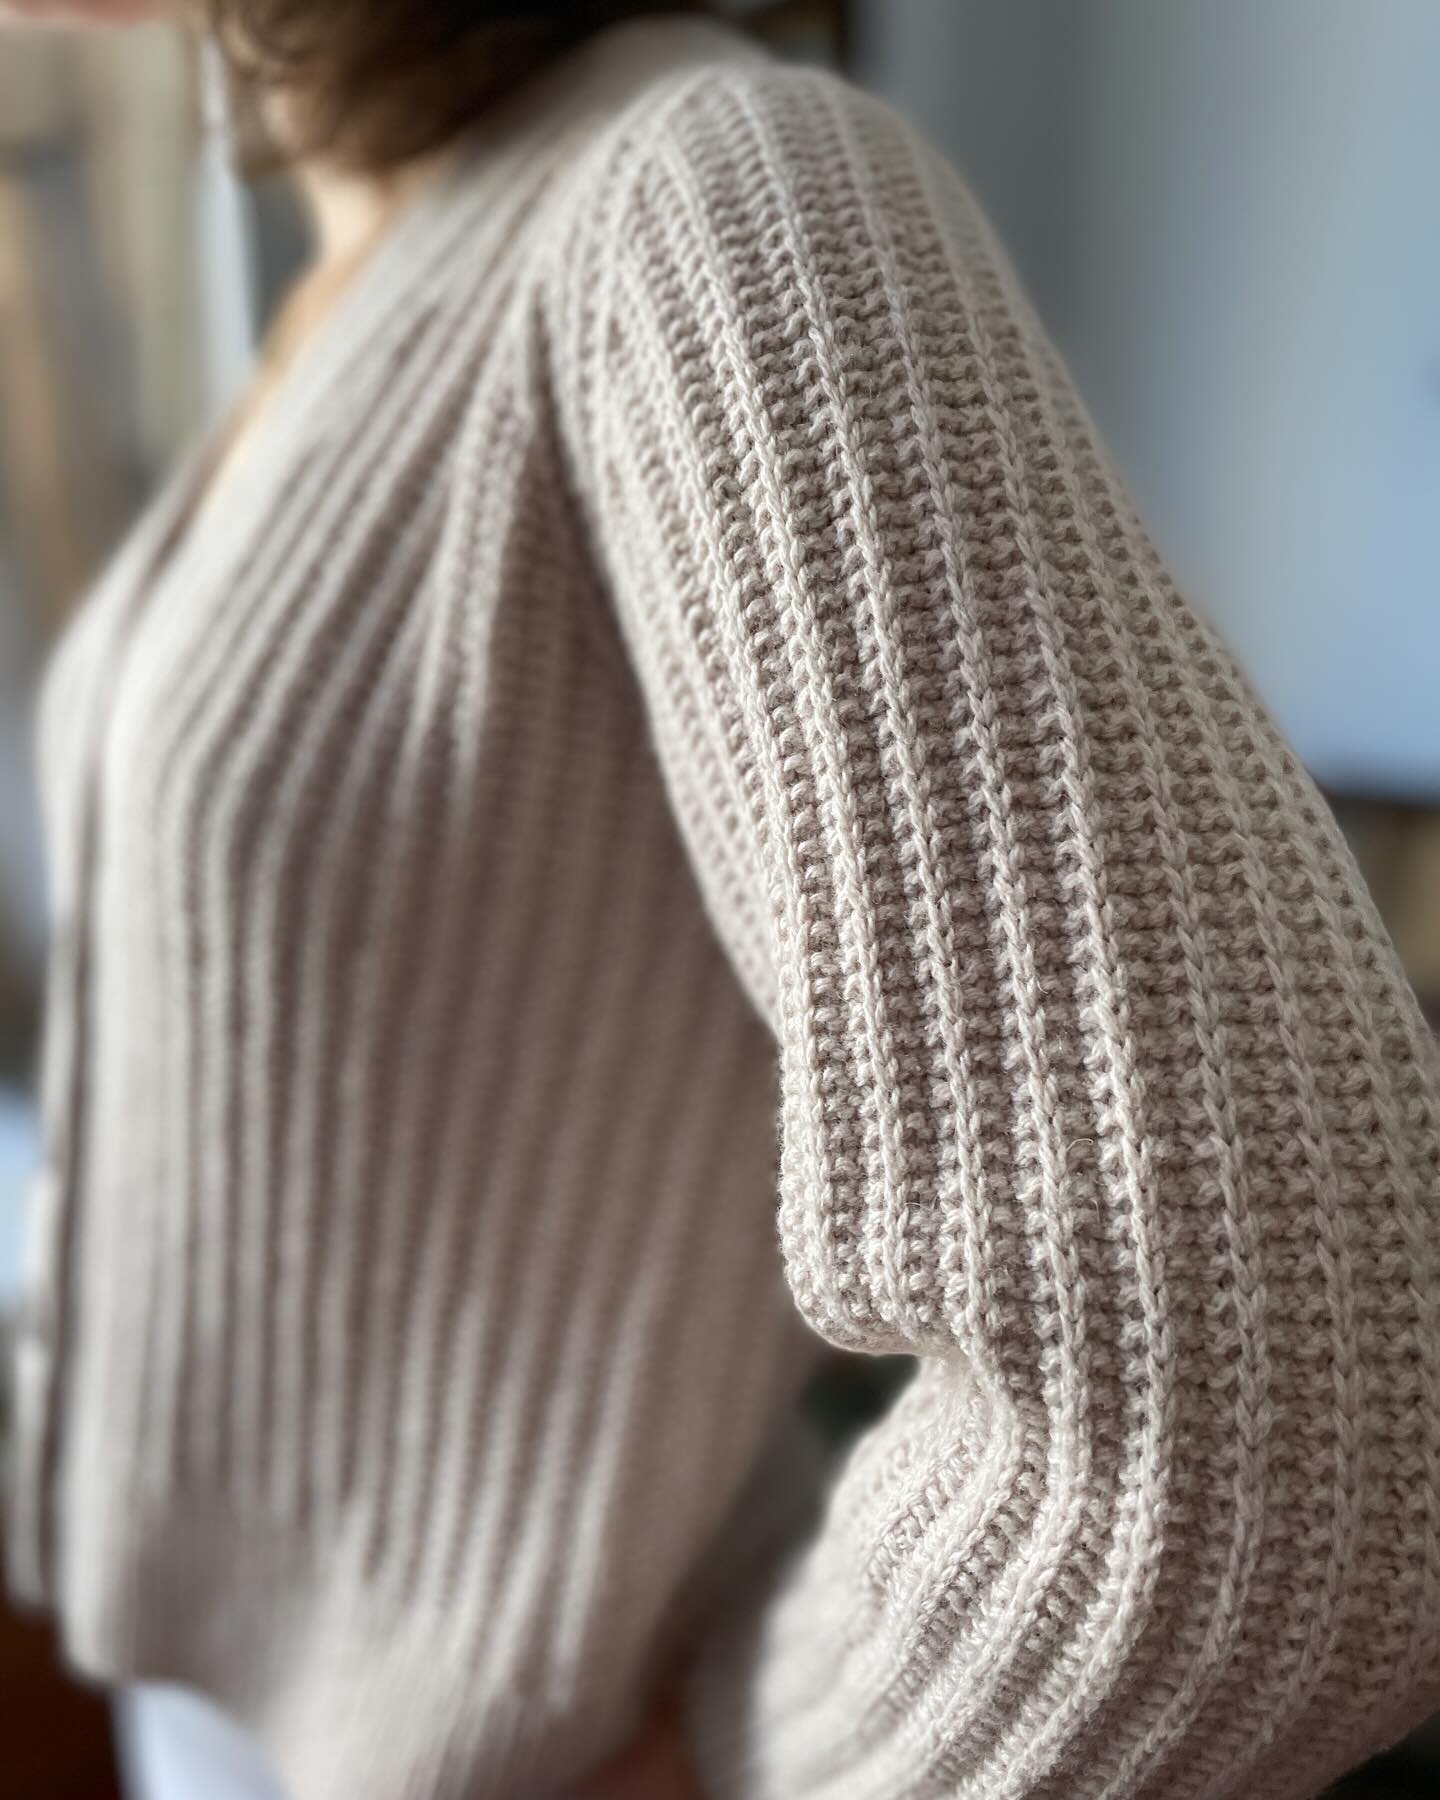 After a few months resting in the sweater box, my Hornbaek cardigan is back and ready to be my indispensable Spring layer. 

Pattern: Hornbaek Cardigan
Yarn shown: @holstgarn Coast held double. See other suggested yarns below. 

@dererumnatura Ulysse